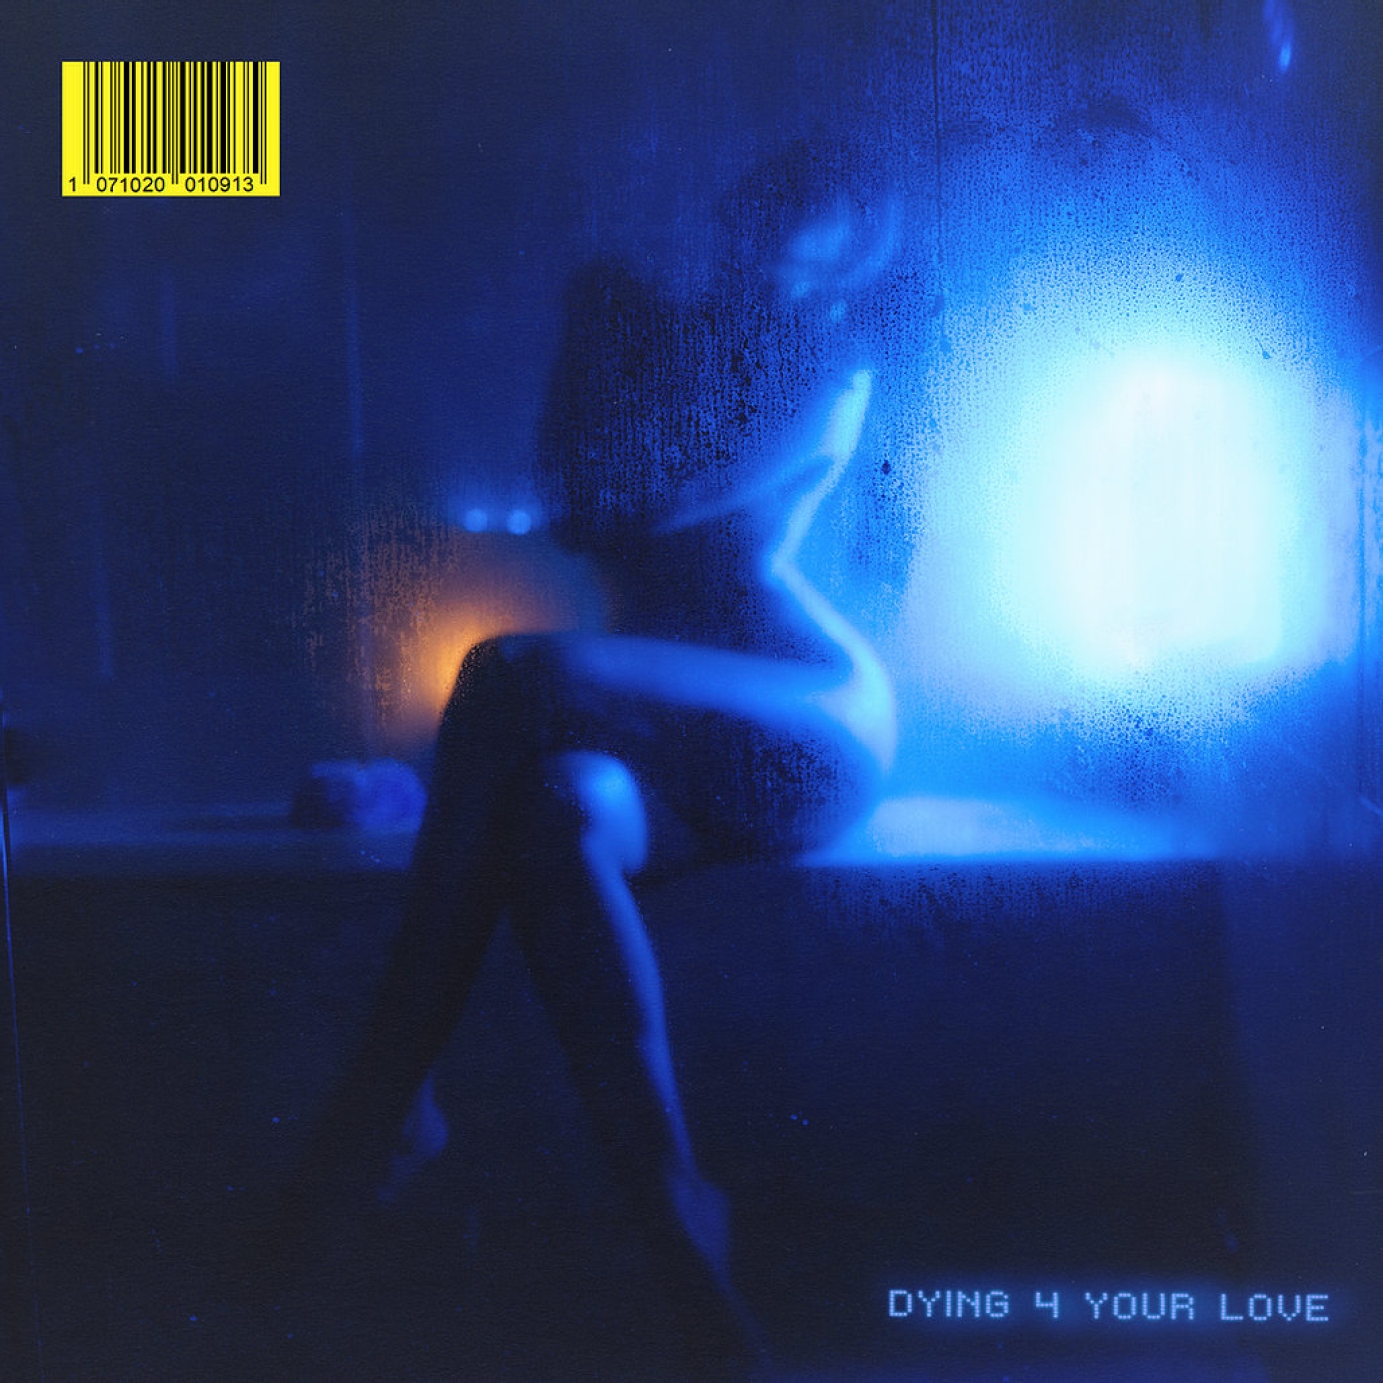 Snoh Aalegra "Dying 4 Your Love"